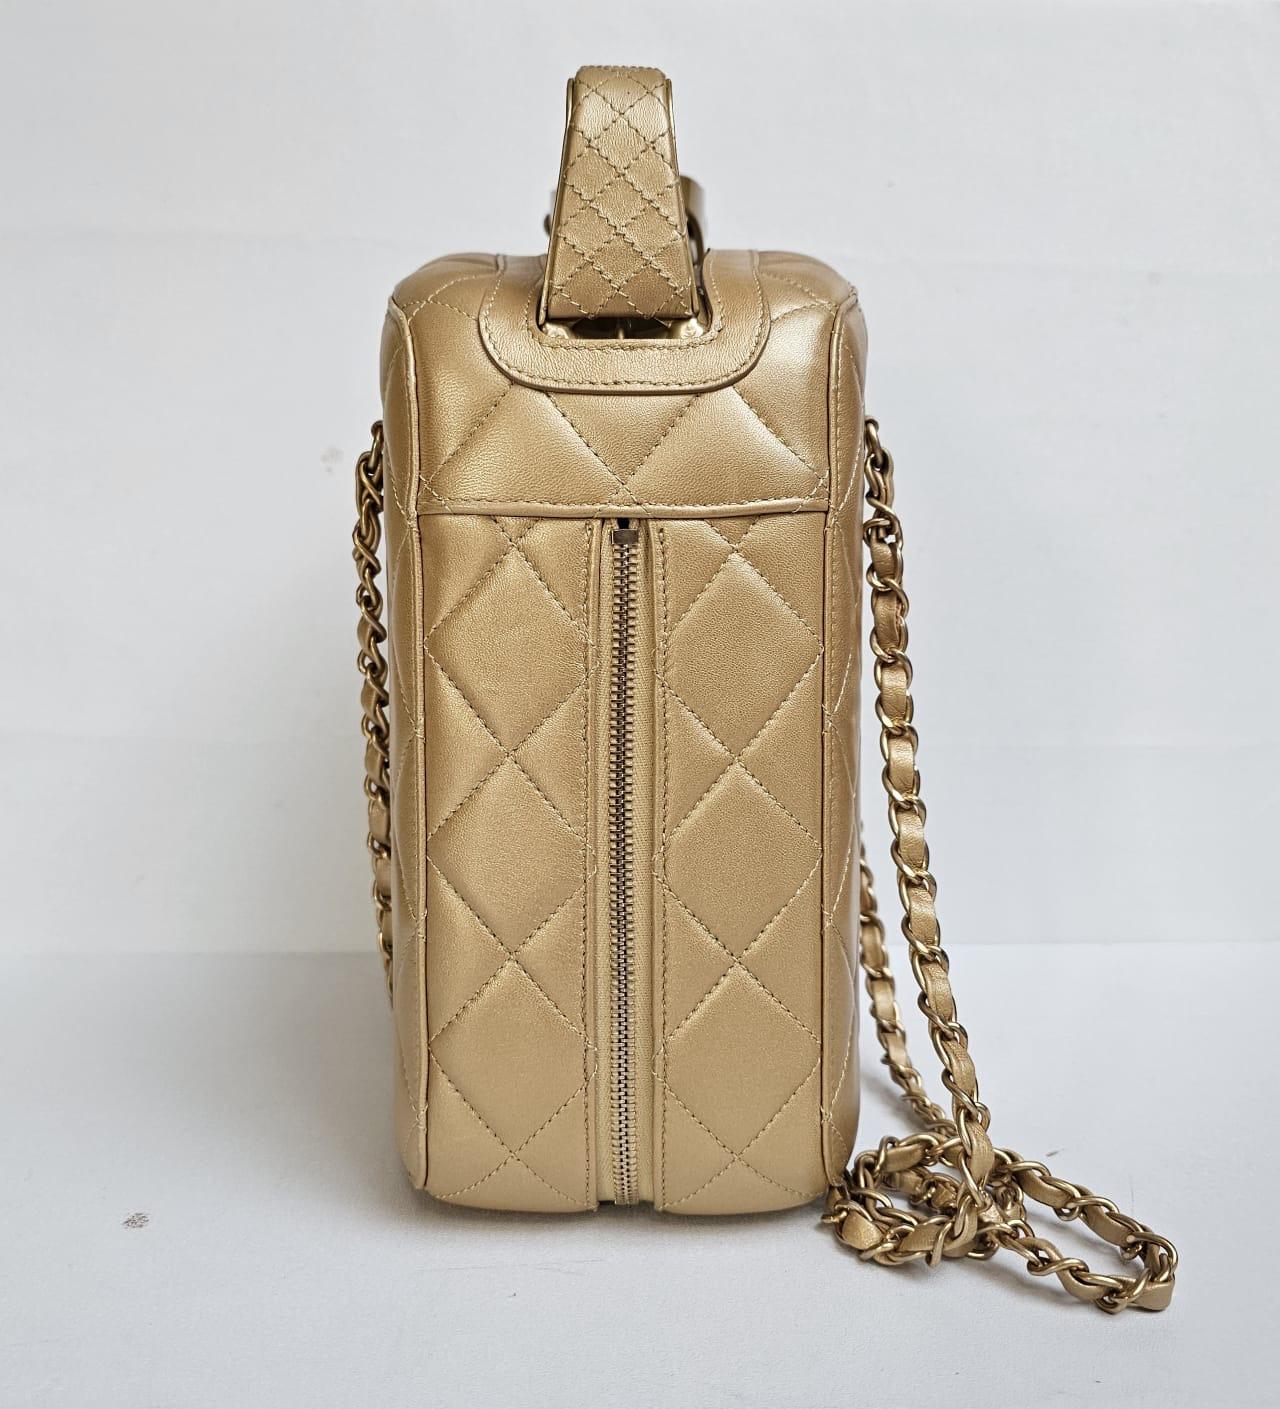 Rare Chanel Cruise 2015 Gold Night Gas Tank Jerry Can Accessory Bag In Good Condition For Sale In Jakarta, Daerah Khusus Ibukota Jakarta